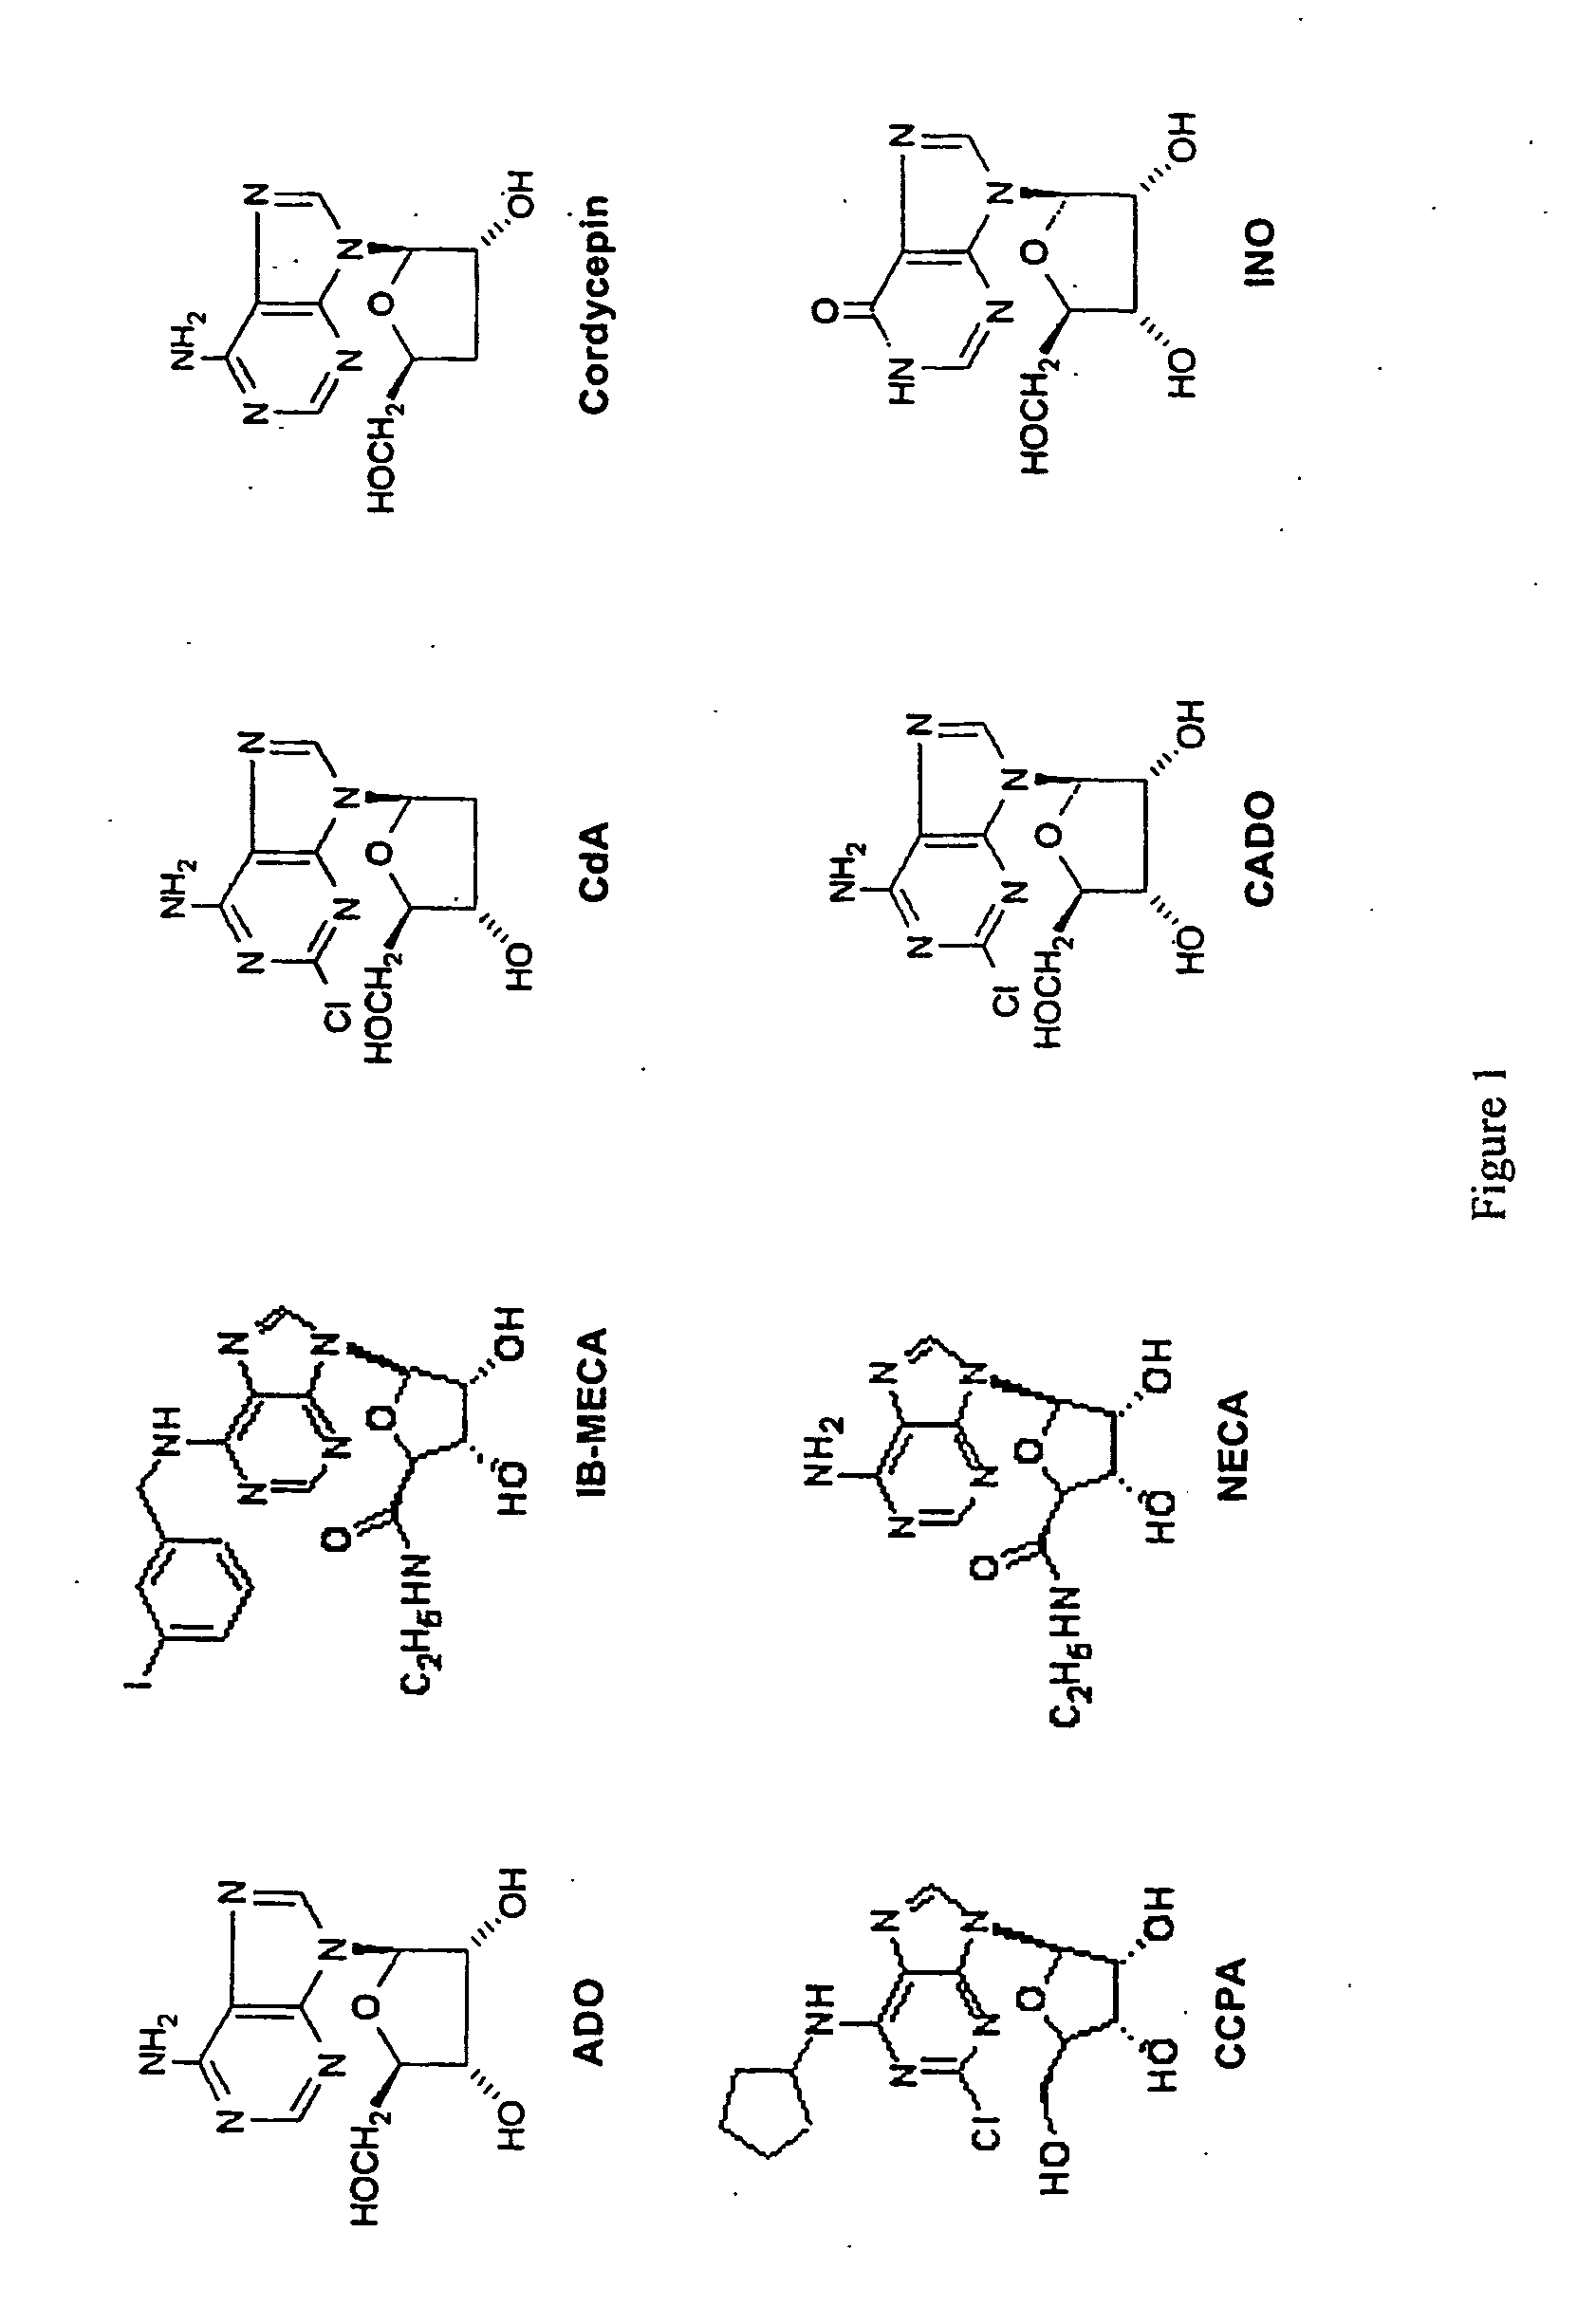 Method of treating cancer using adenosine and its analogs